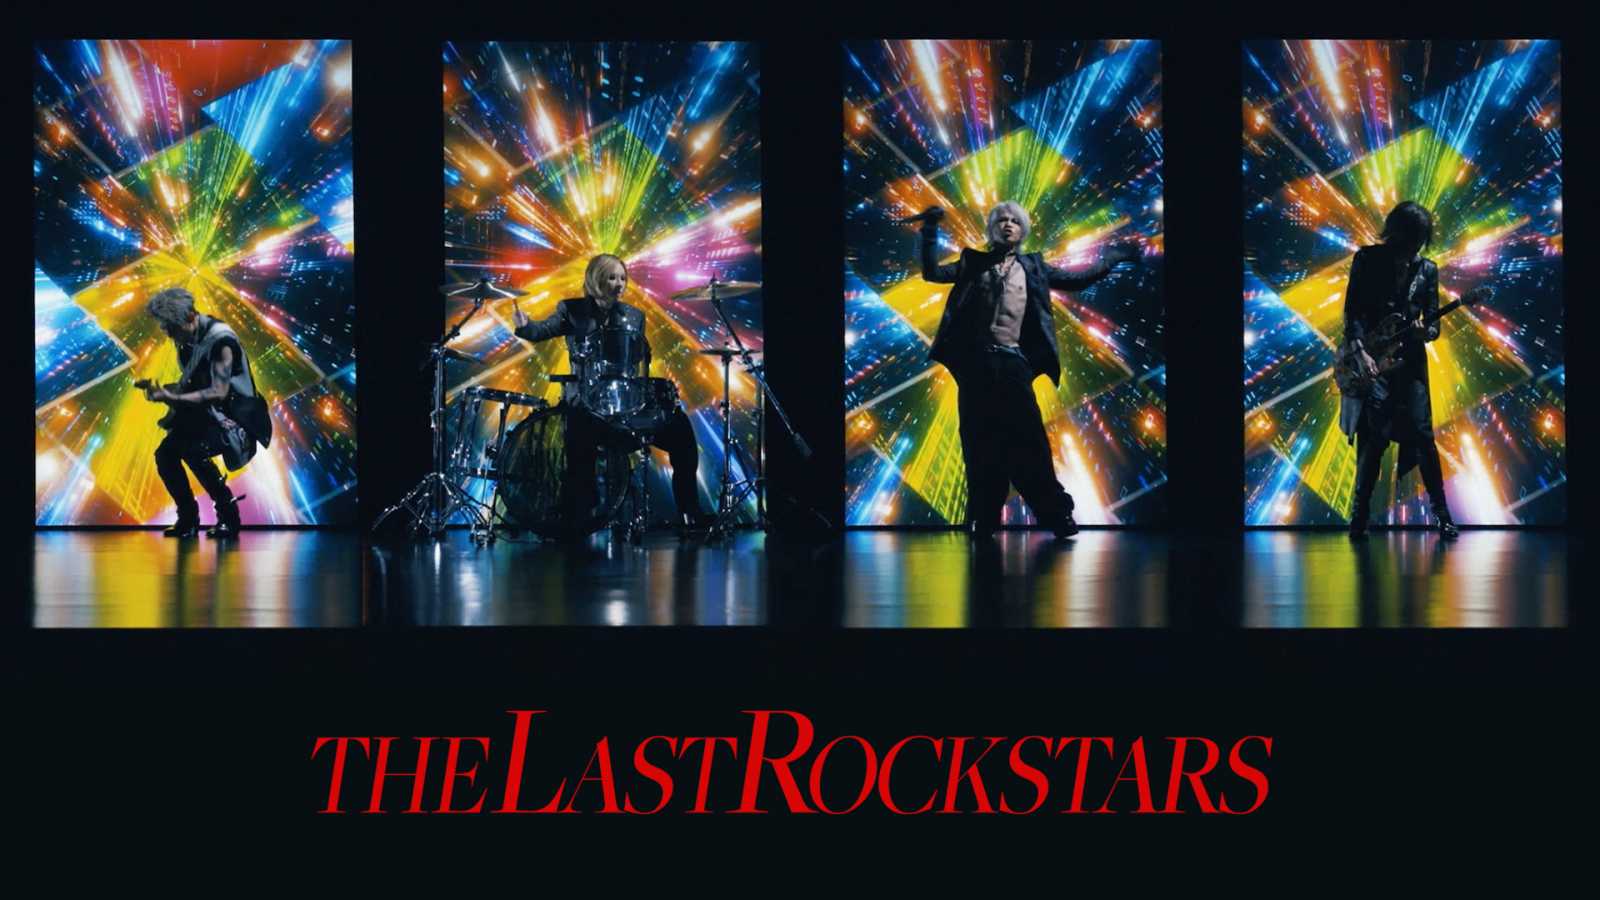 THE LAST ROCKSTARS Reveal Music Video for 